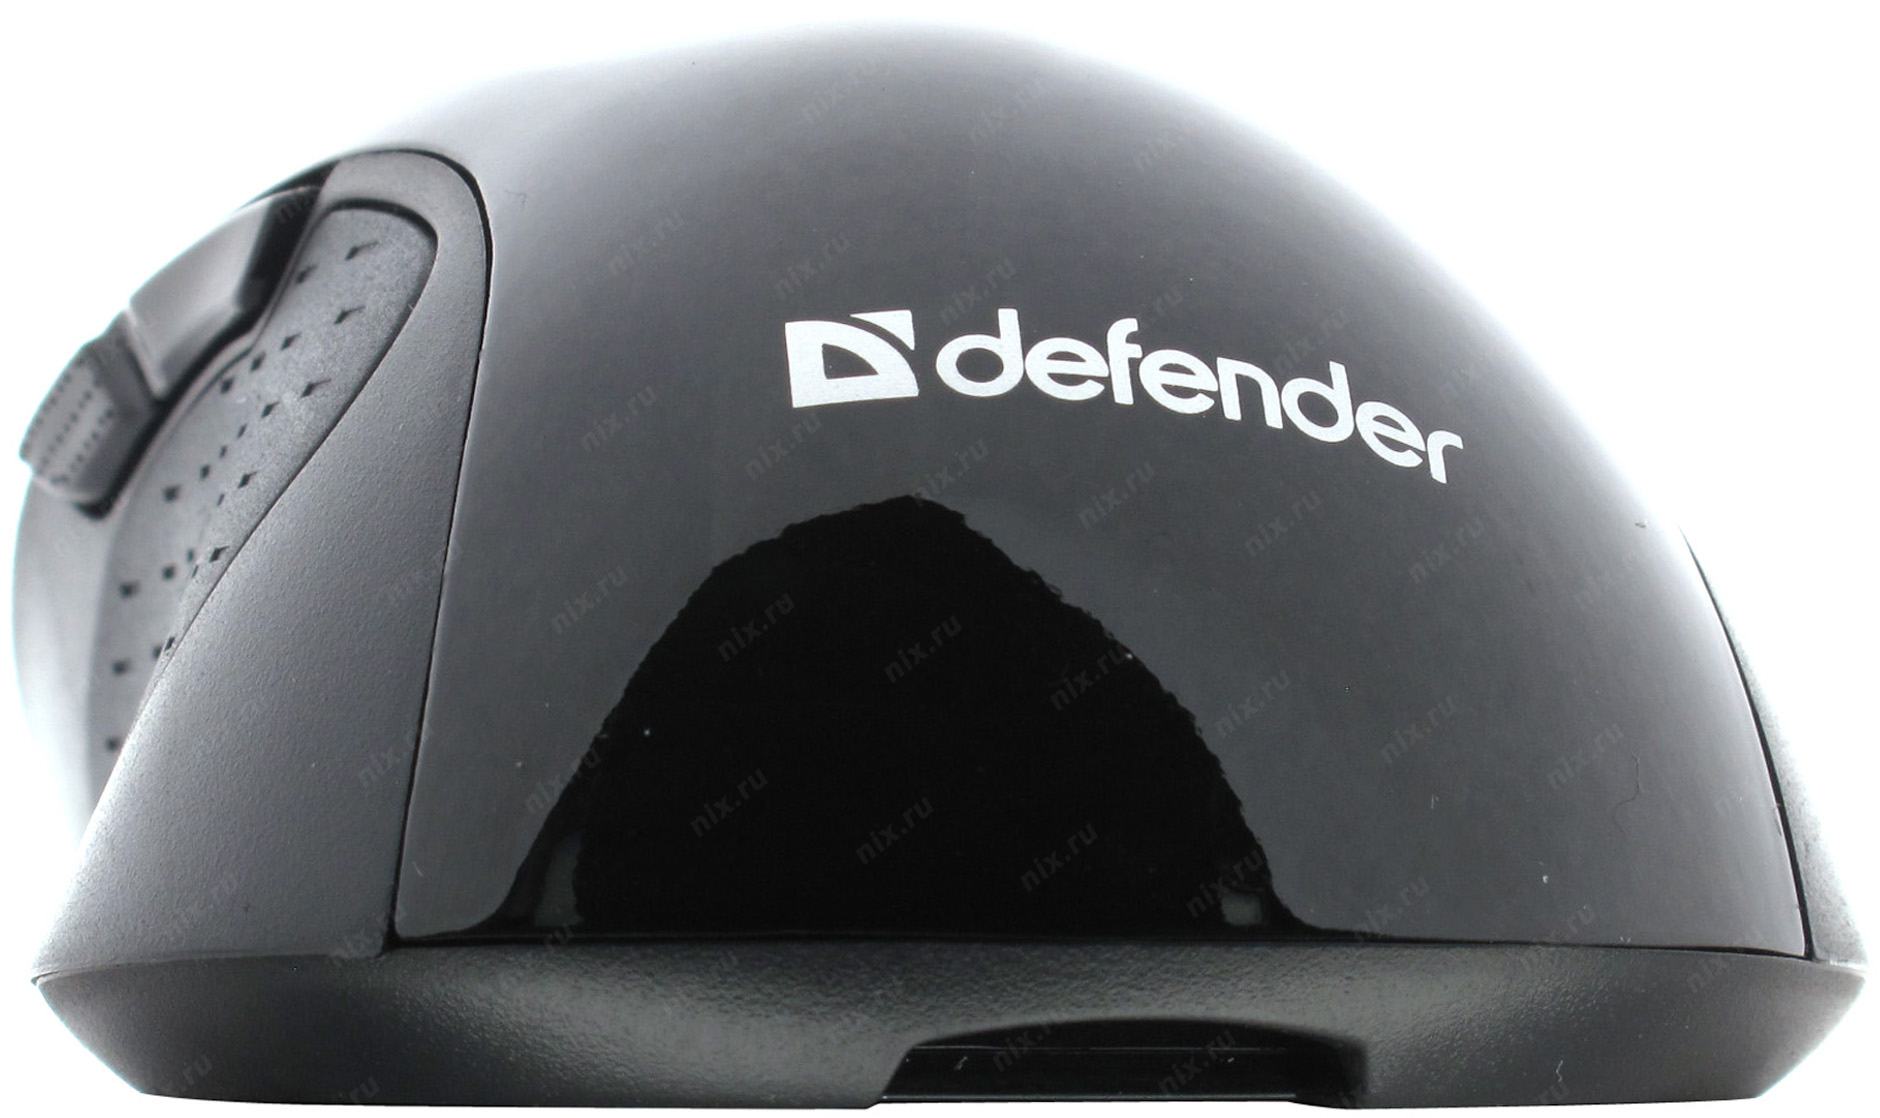 Wireless Optical Mouse Verso mm395. Cobra Nano Black. Defender touch mm